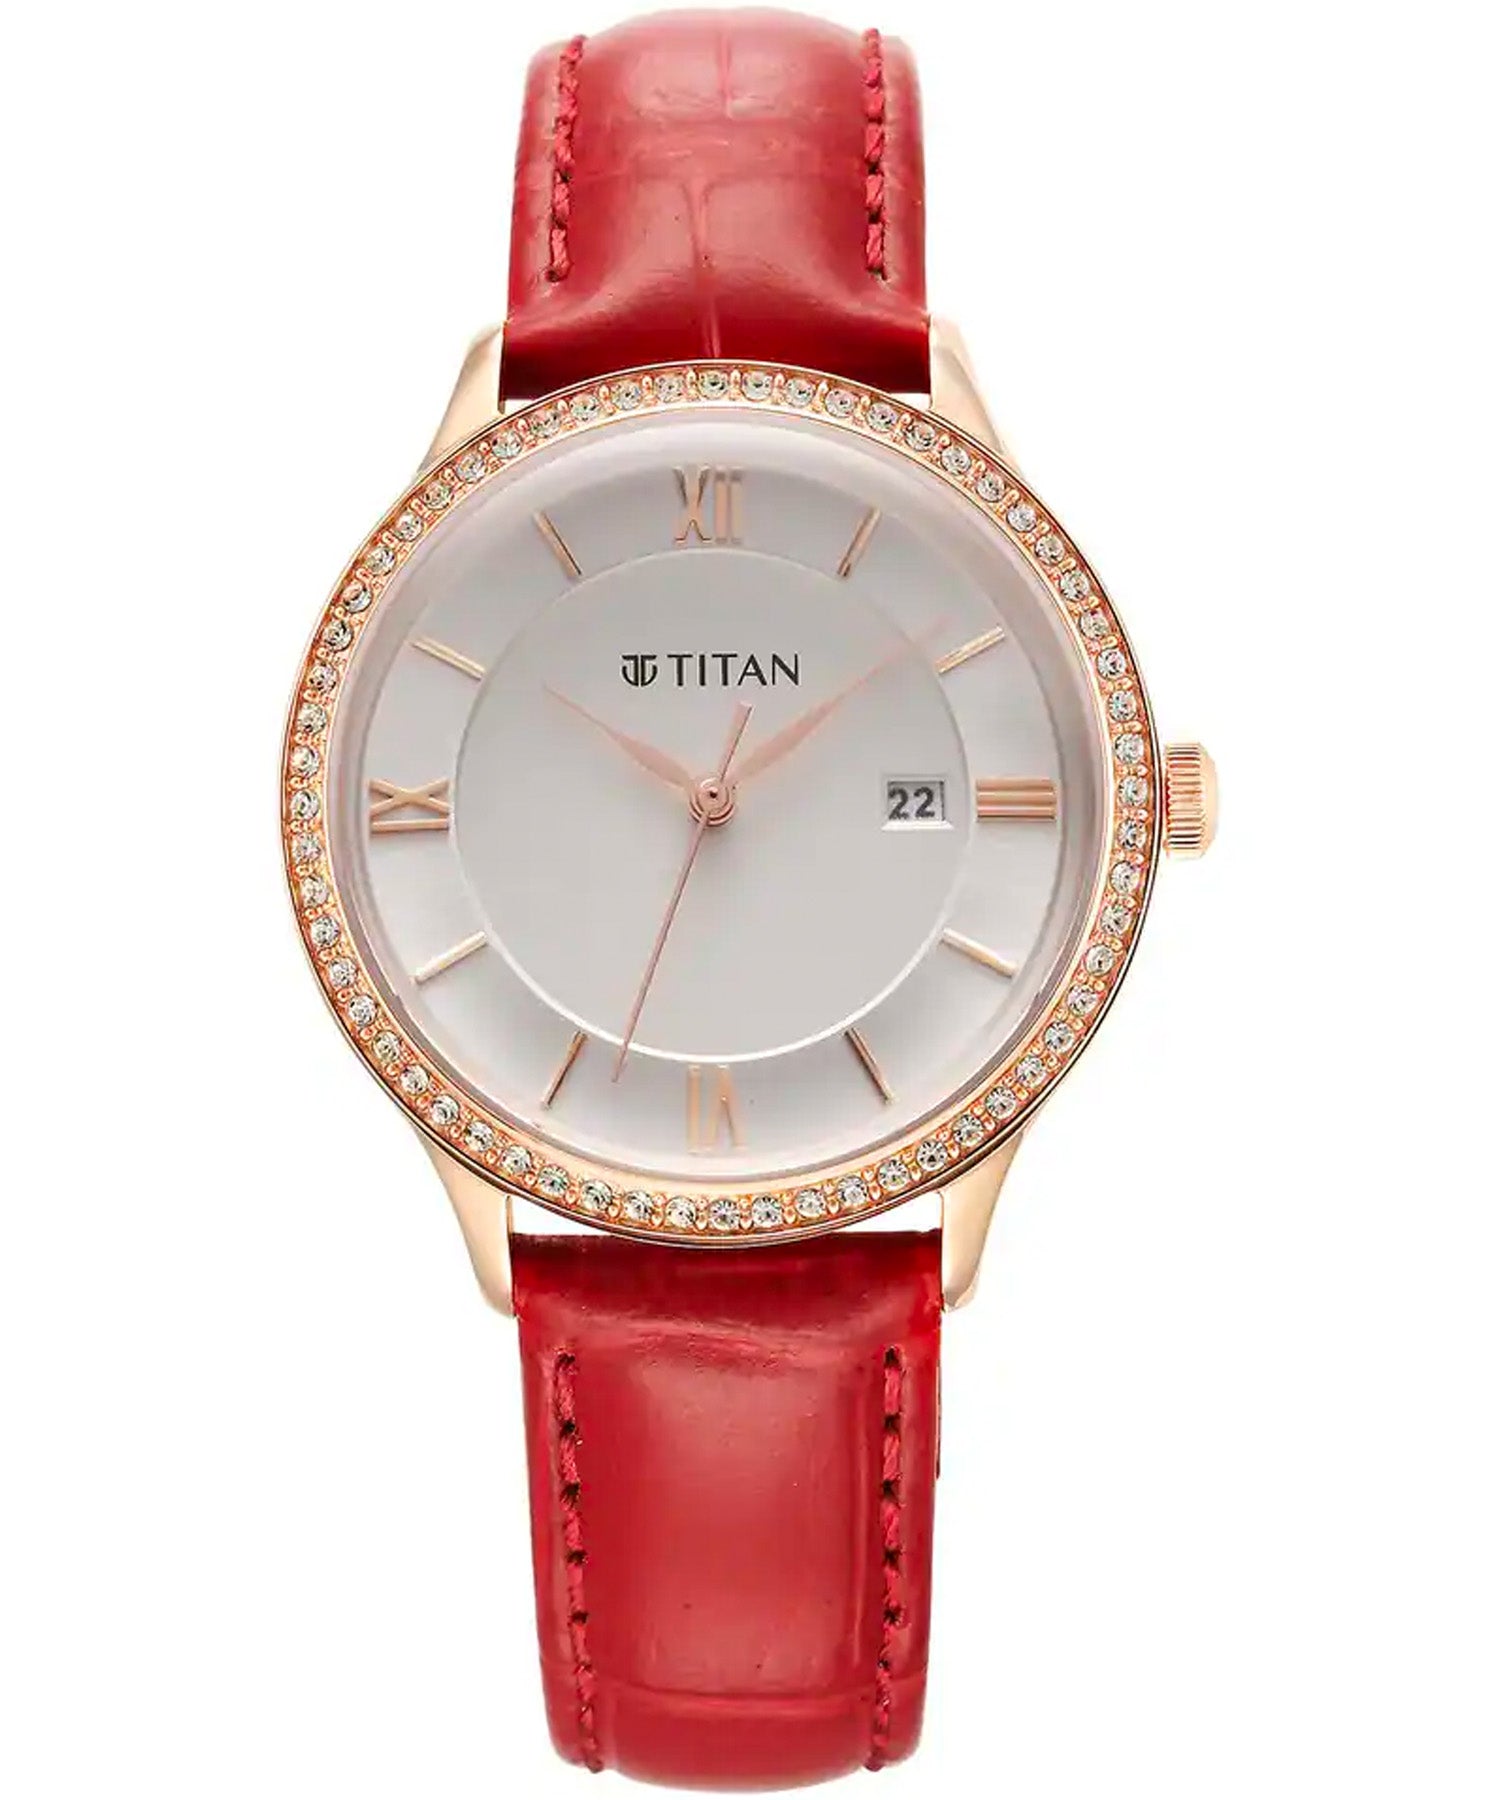 Titan Women's Watch Bright Leathers Collection, Silver Dial Red Leather Strap, 95247WL01